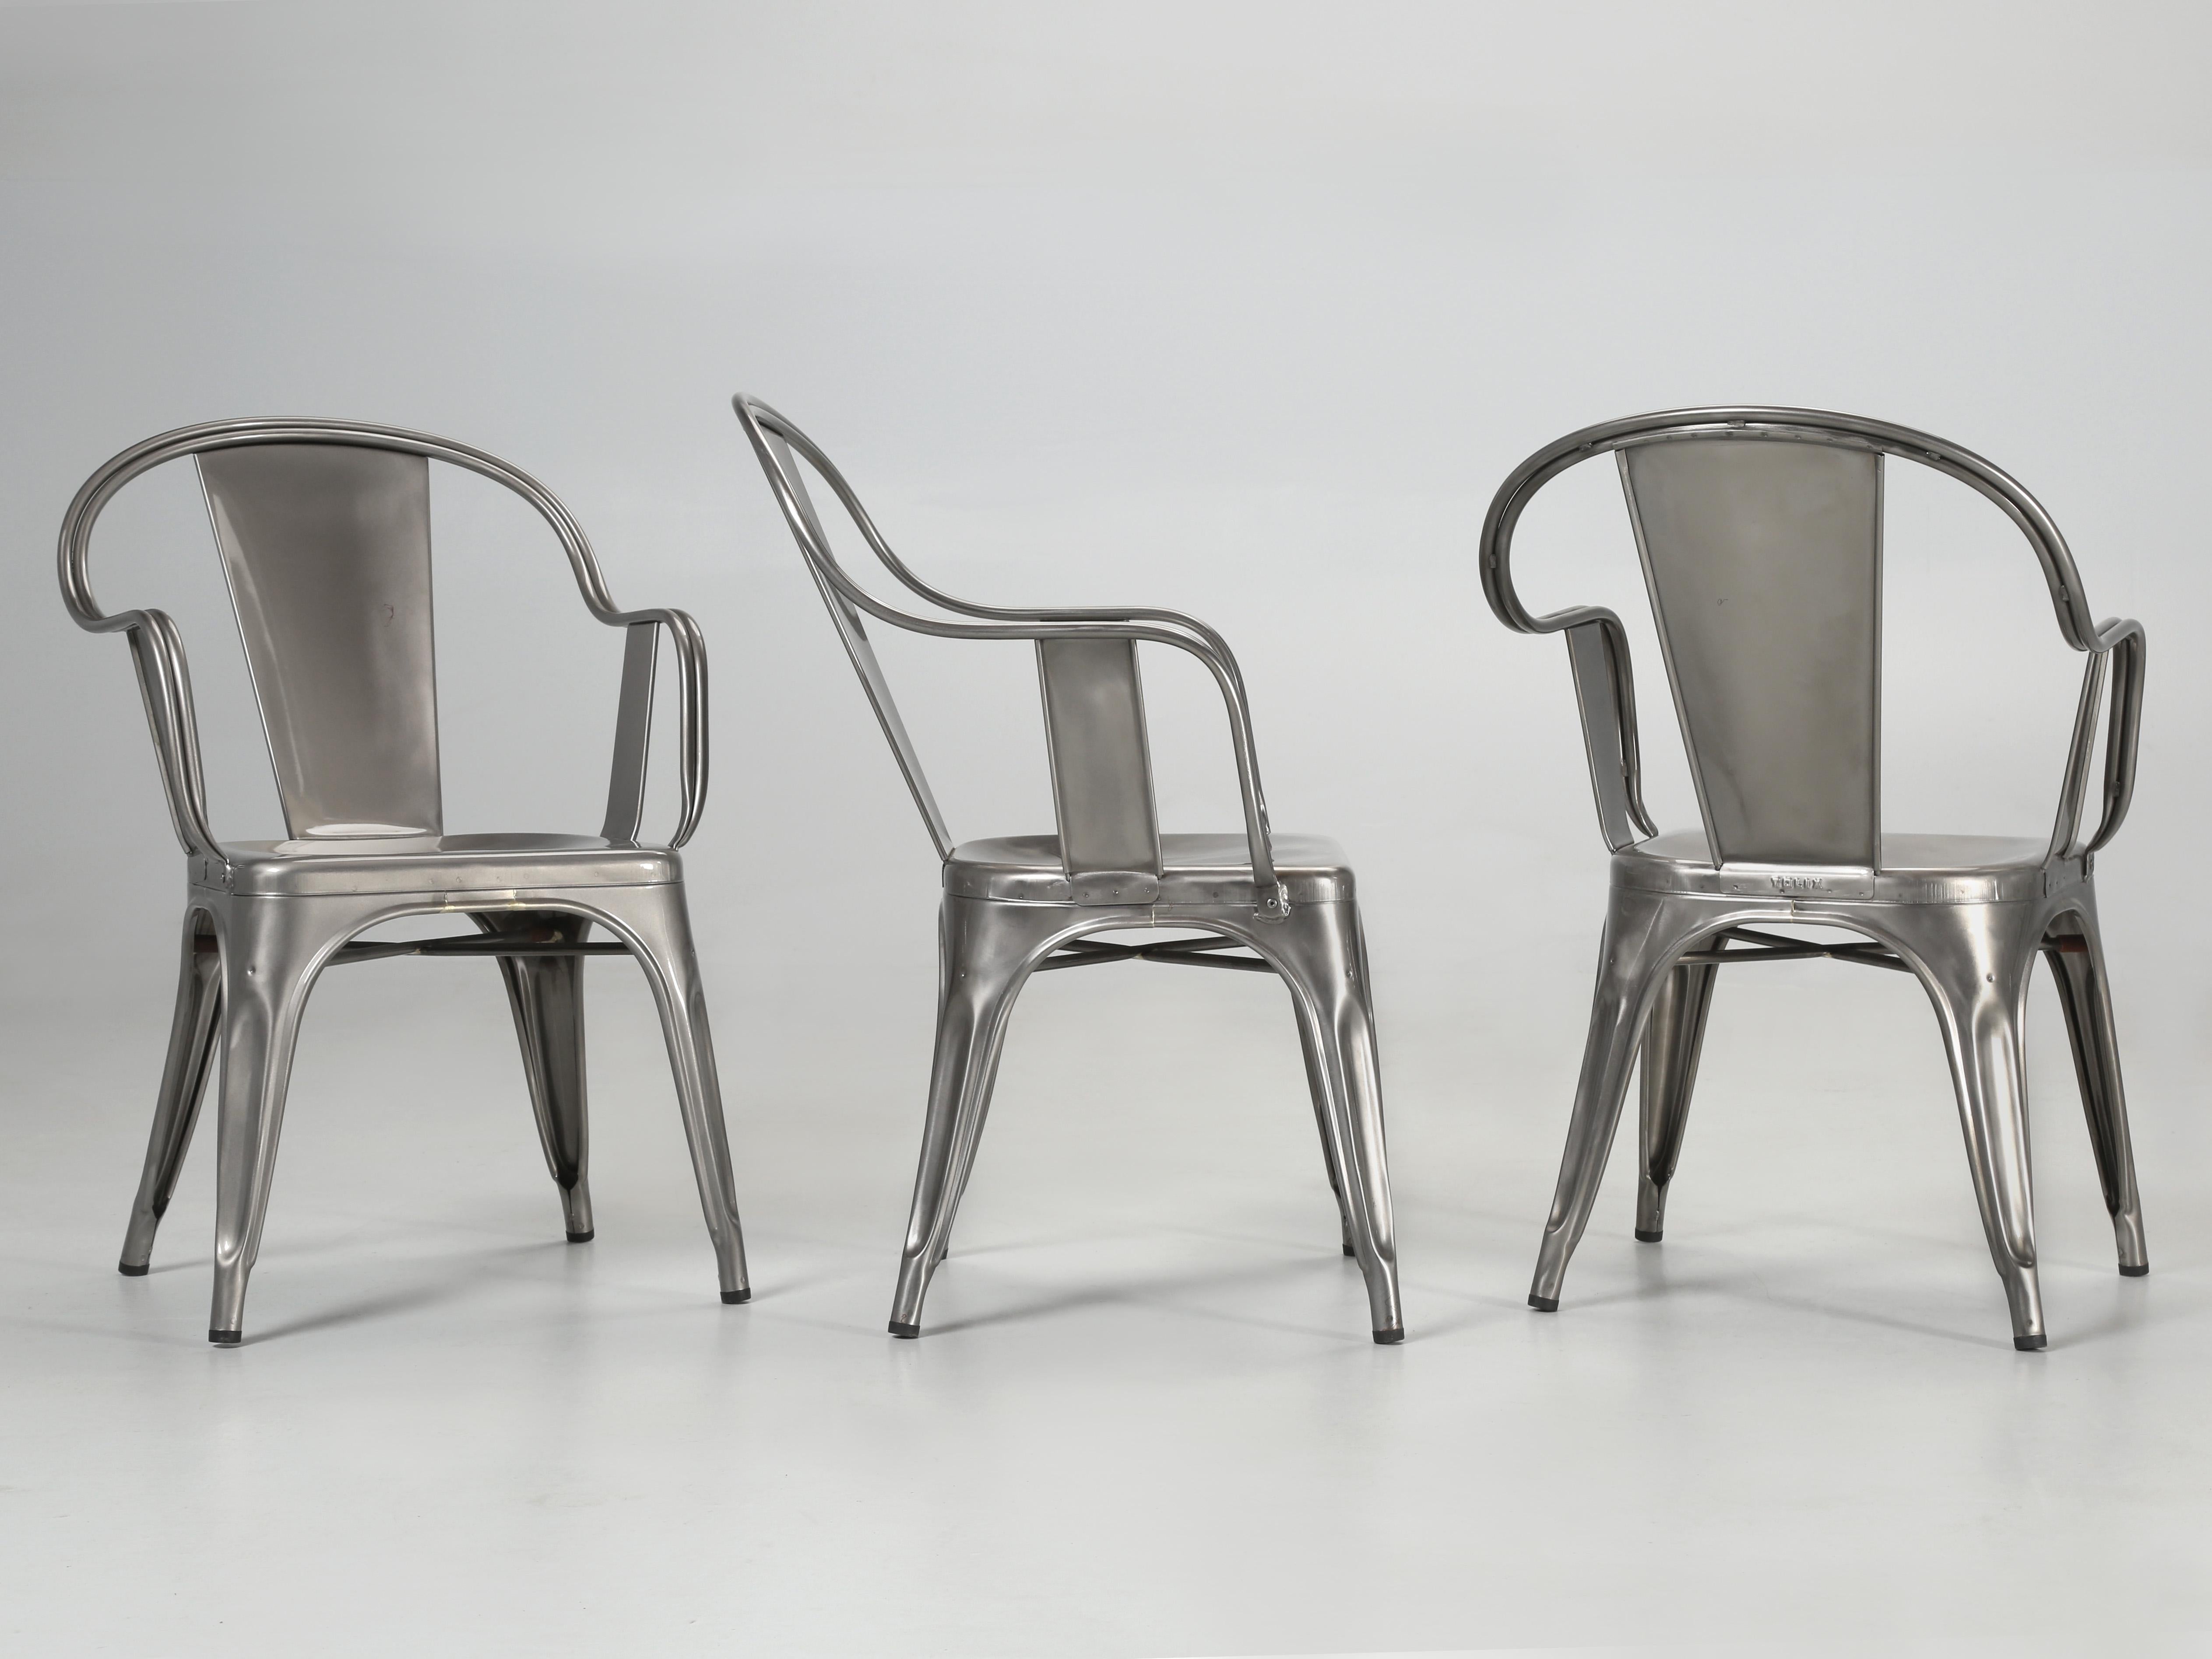 Genuine Tolix chairs made in France, complete with TOLIX stamp of authenticity. These Tolix chairs are considered iconic, and have been displayed in the MoMA, Germany’s Vitra Design Museum, and Paris’s Pompidou Center. Up to 12 can be stacked at one